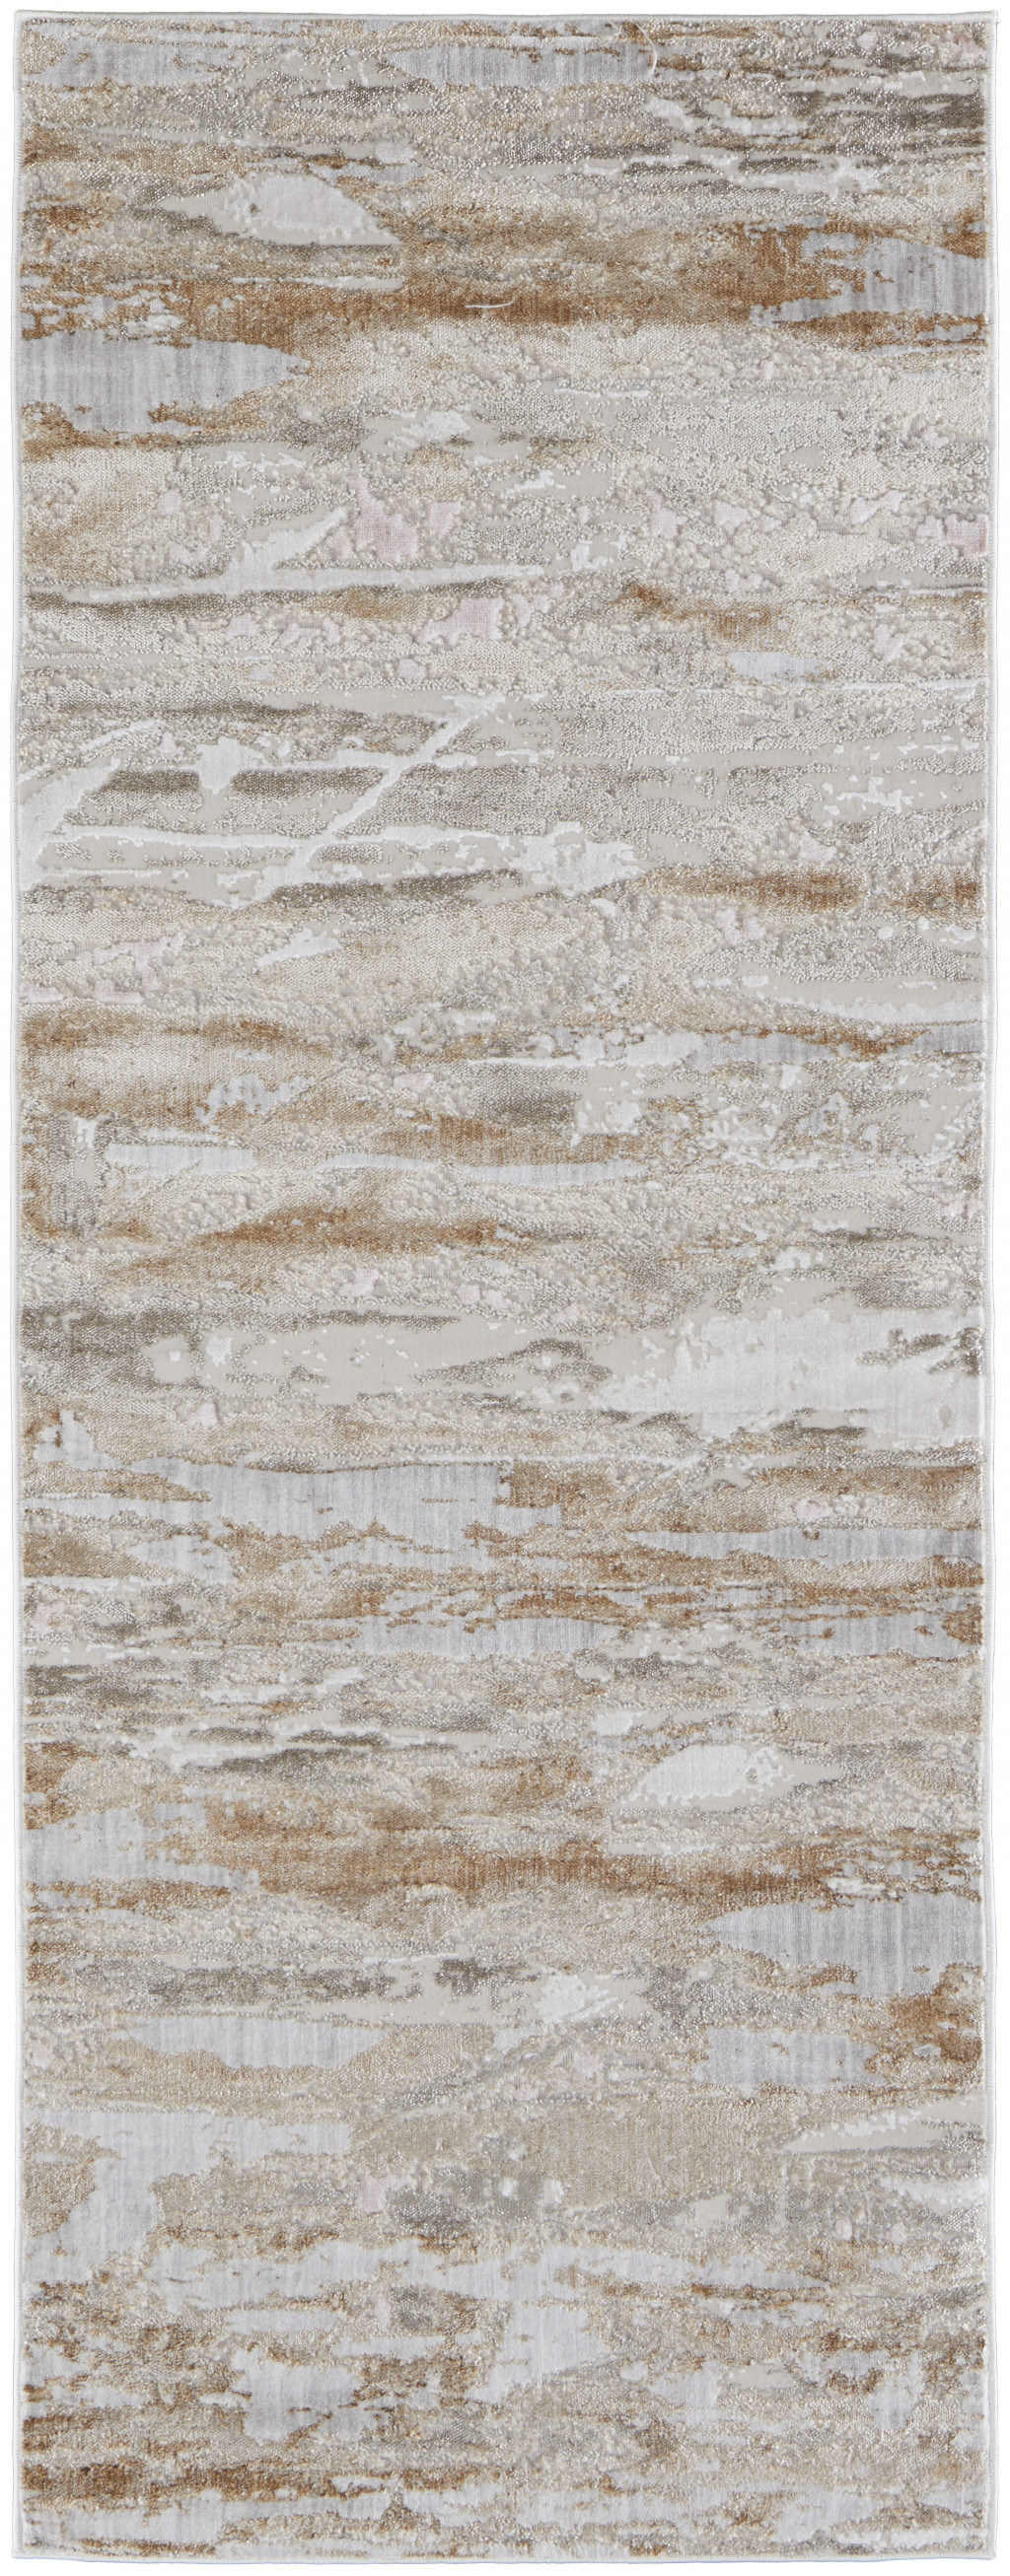 8' Tan And Ivory Abstract Power Loom Distressed Runner Rug-514145-1